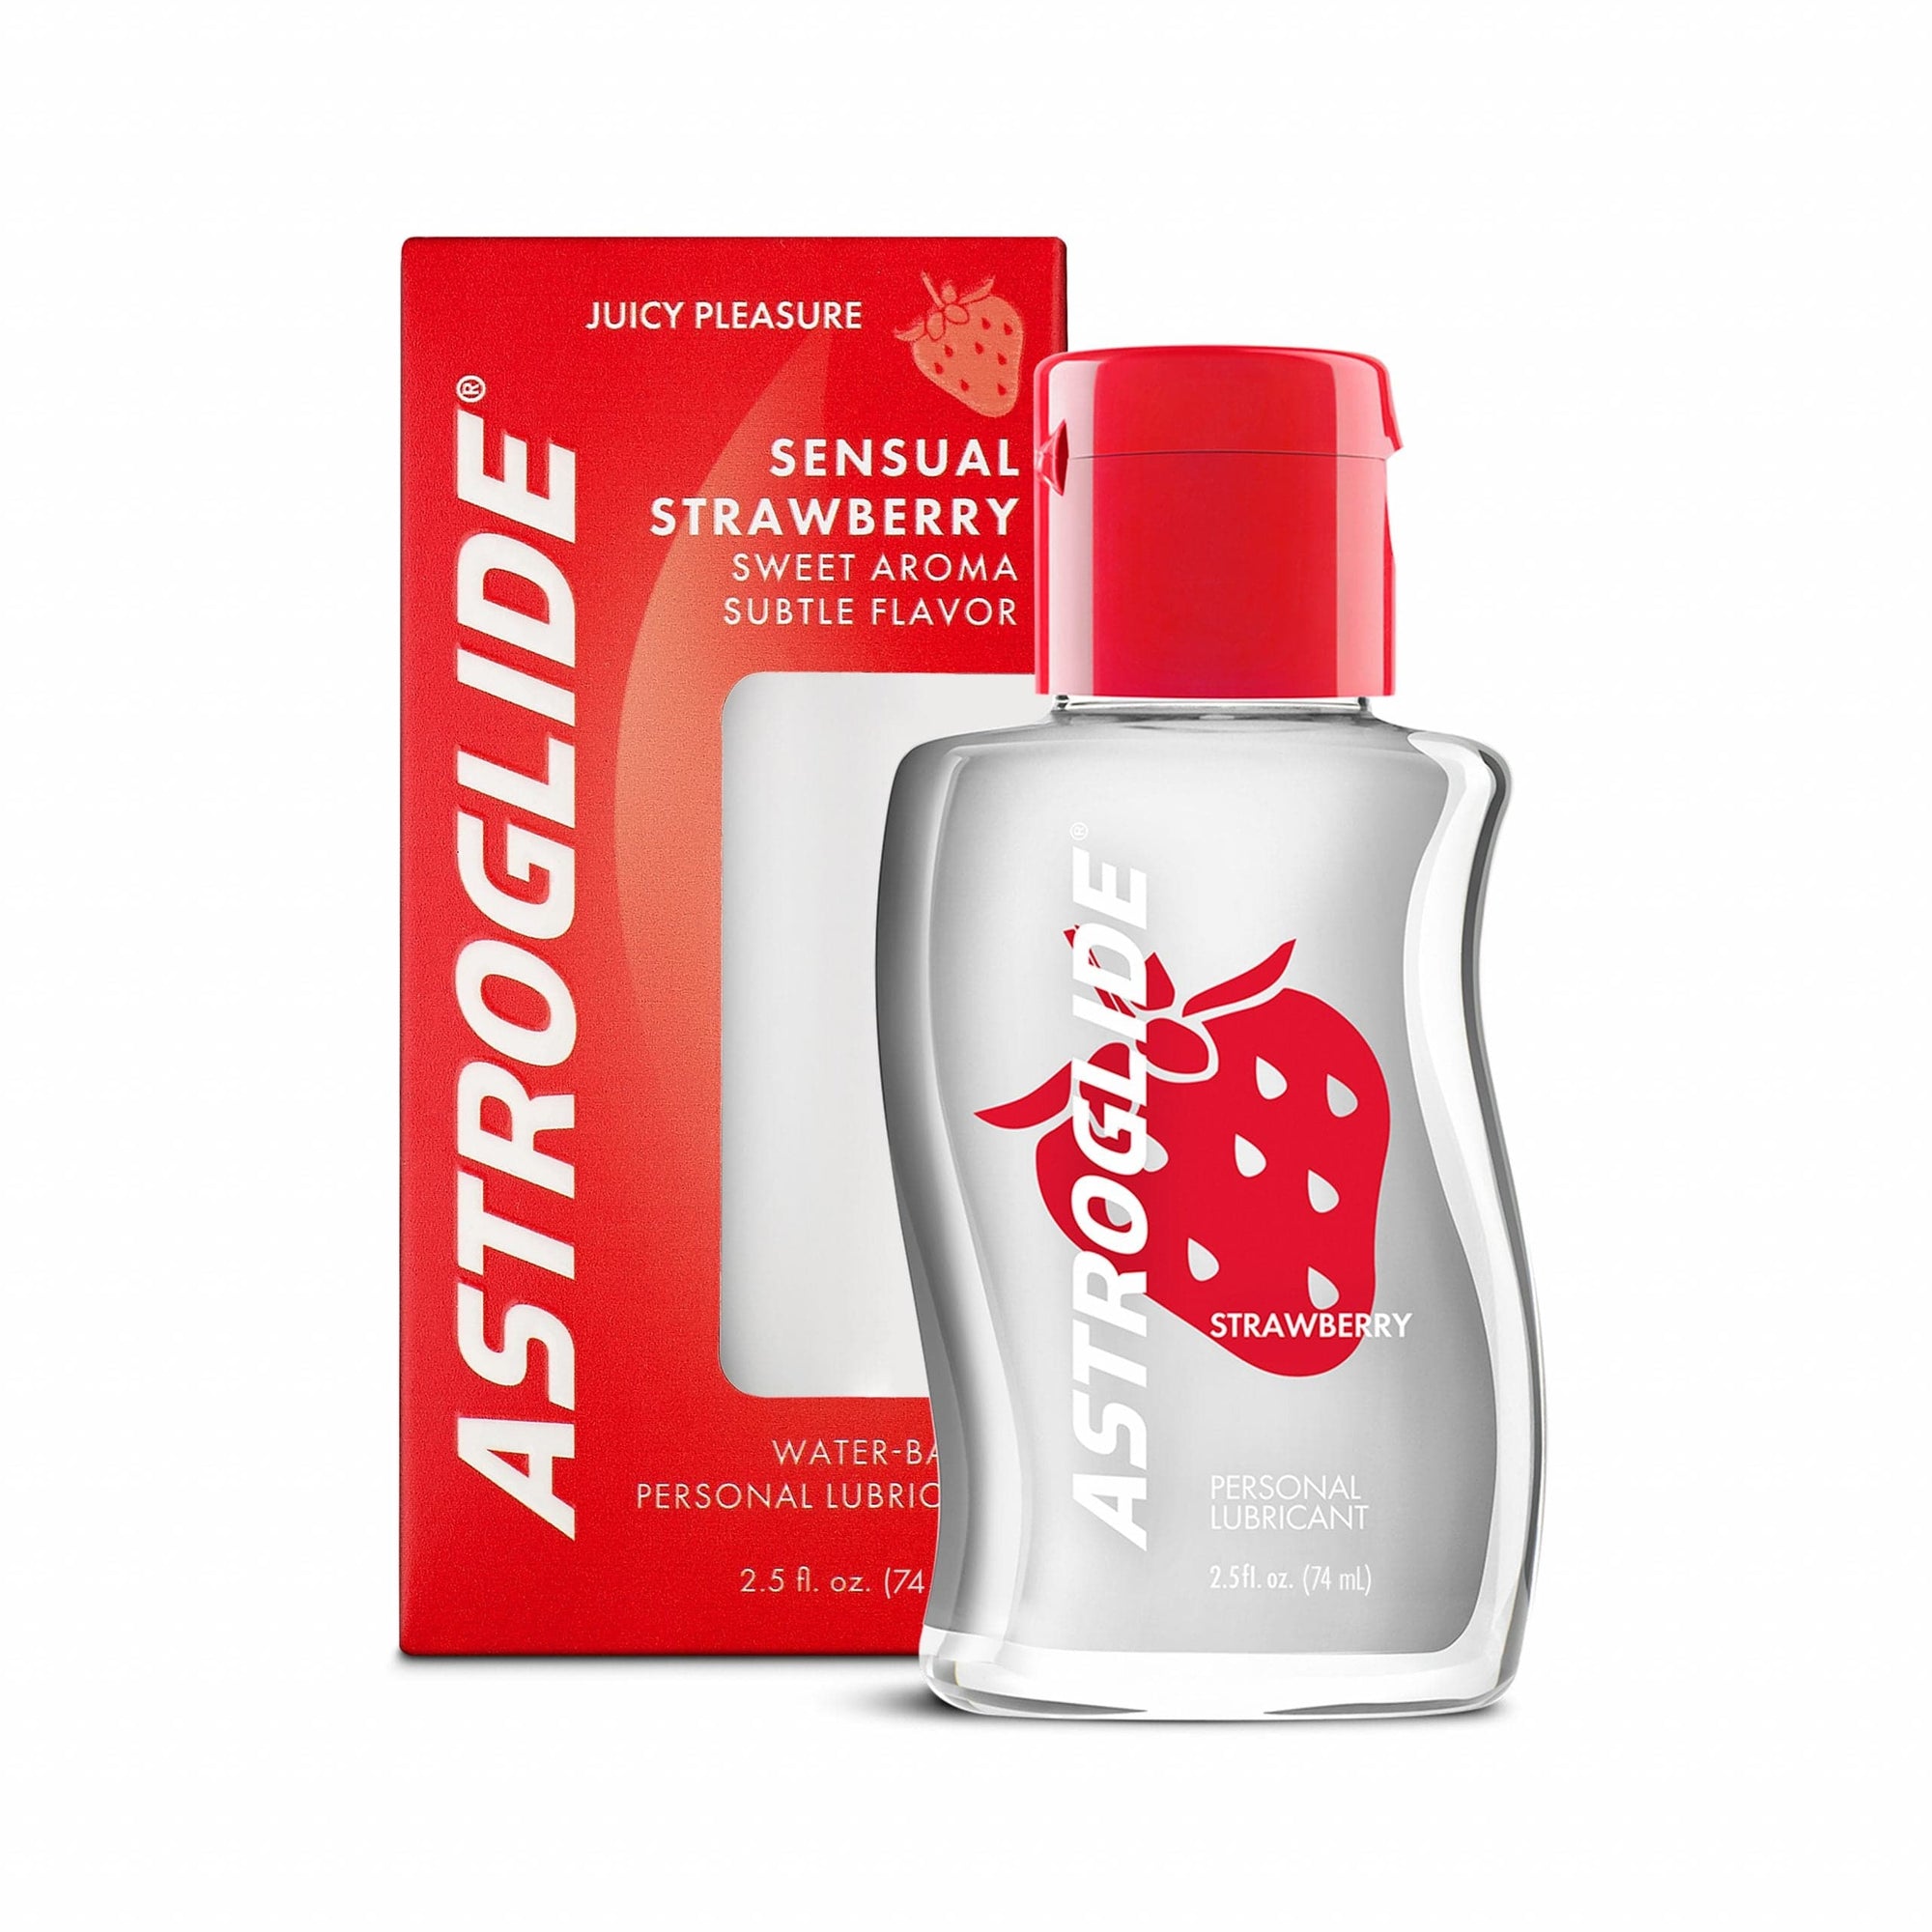 Astroglide - Sensual Strawberry Flavoured Water Based Personal Lubricant - 74ml Lube (Water Based) 015594010540 Durio.sg